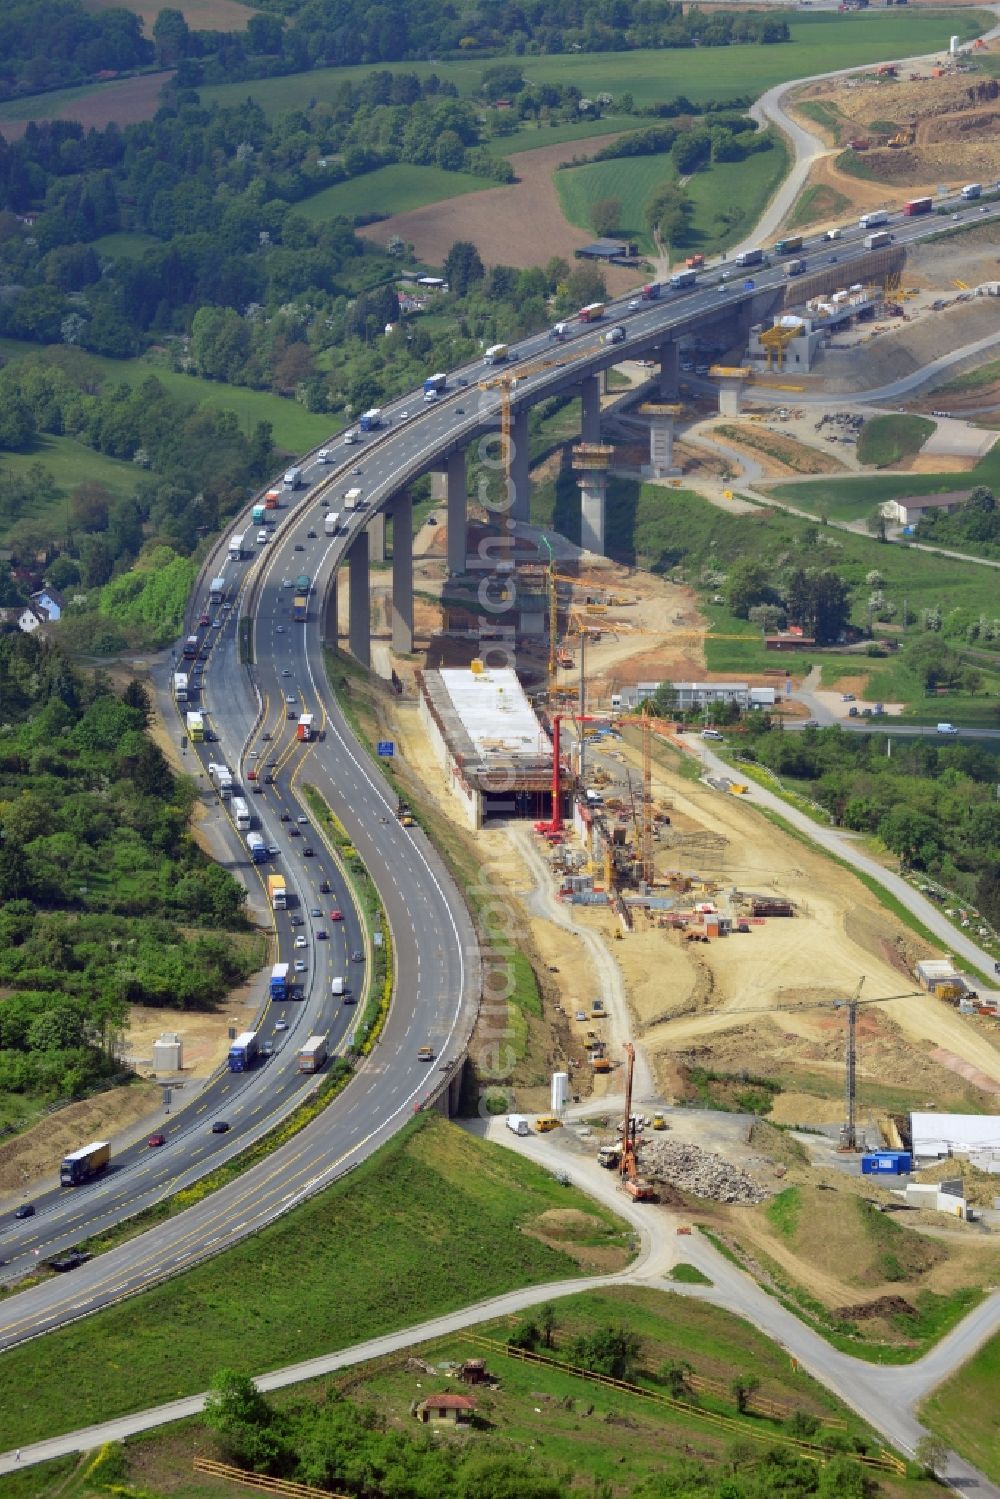 Würzburg from above - Construction work at the Heidingsfeld valley bridge of the federal motorway A3 in the South of Wuerzburg in the state of Bavaria. The bridge spans a valley between two hills. In 2014 it was completely rebuilt by the Arbeitsgemeinschaft Talbruecke Heidingsfeld consisting of Ed. Zueblin AG, Direktion Brueckenbau Bereich Sued Ost und Donges Steeltec